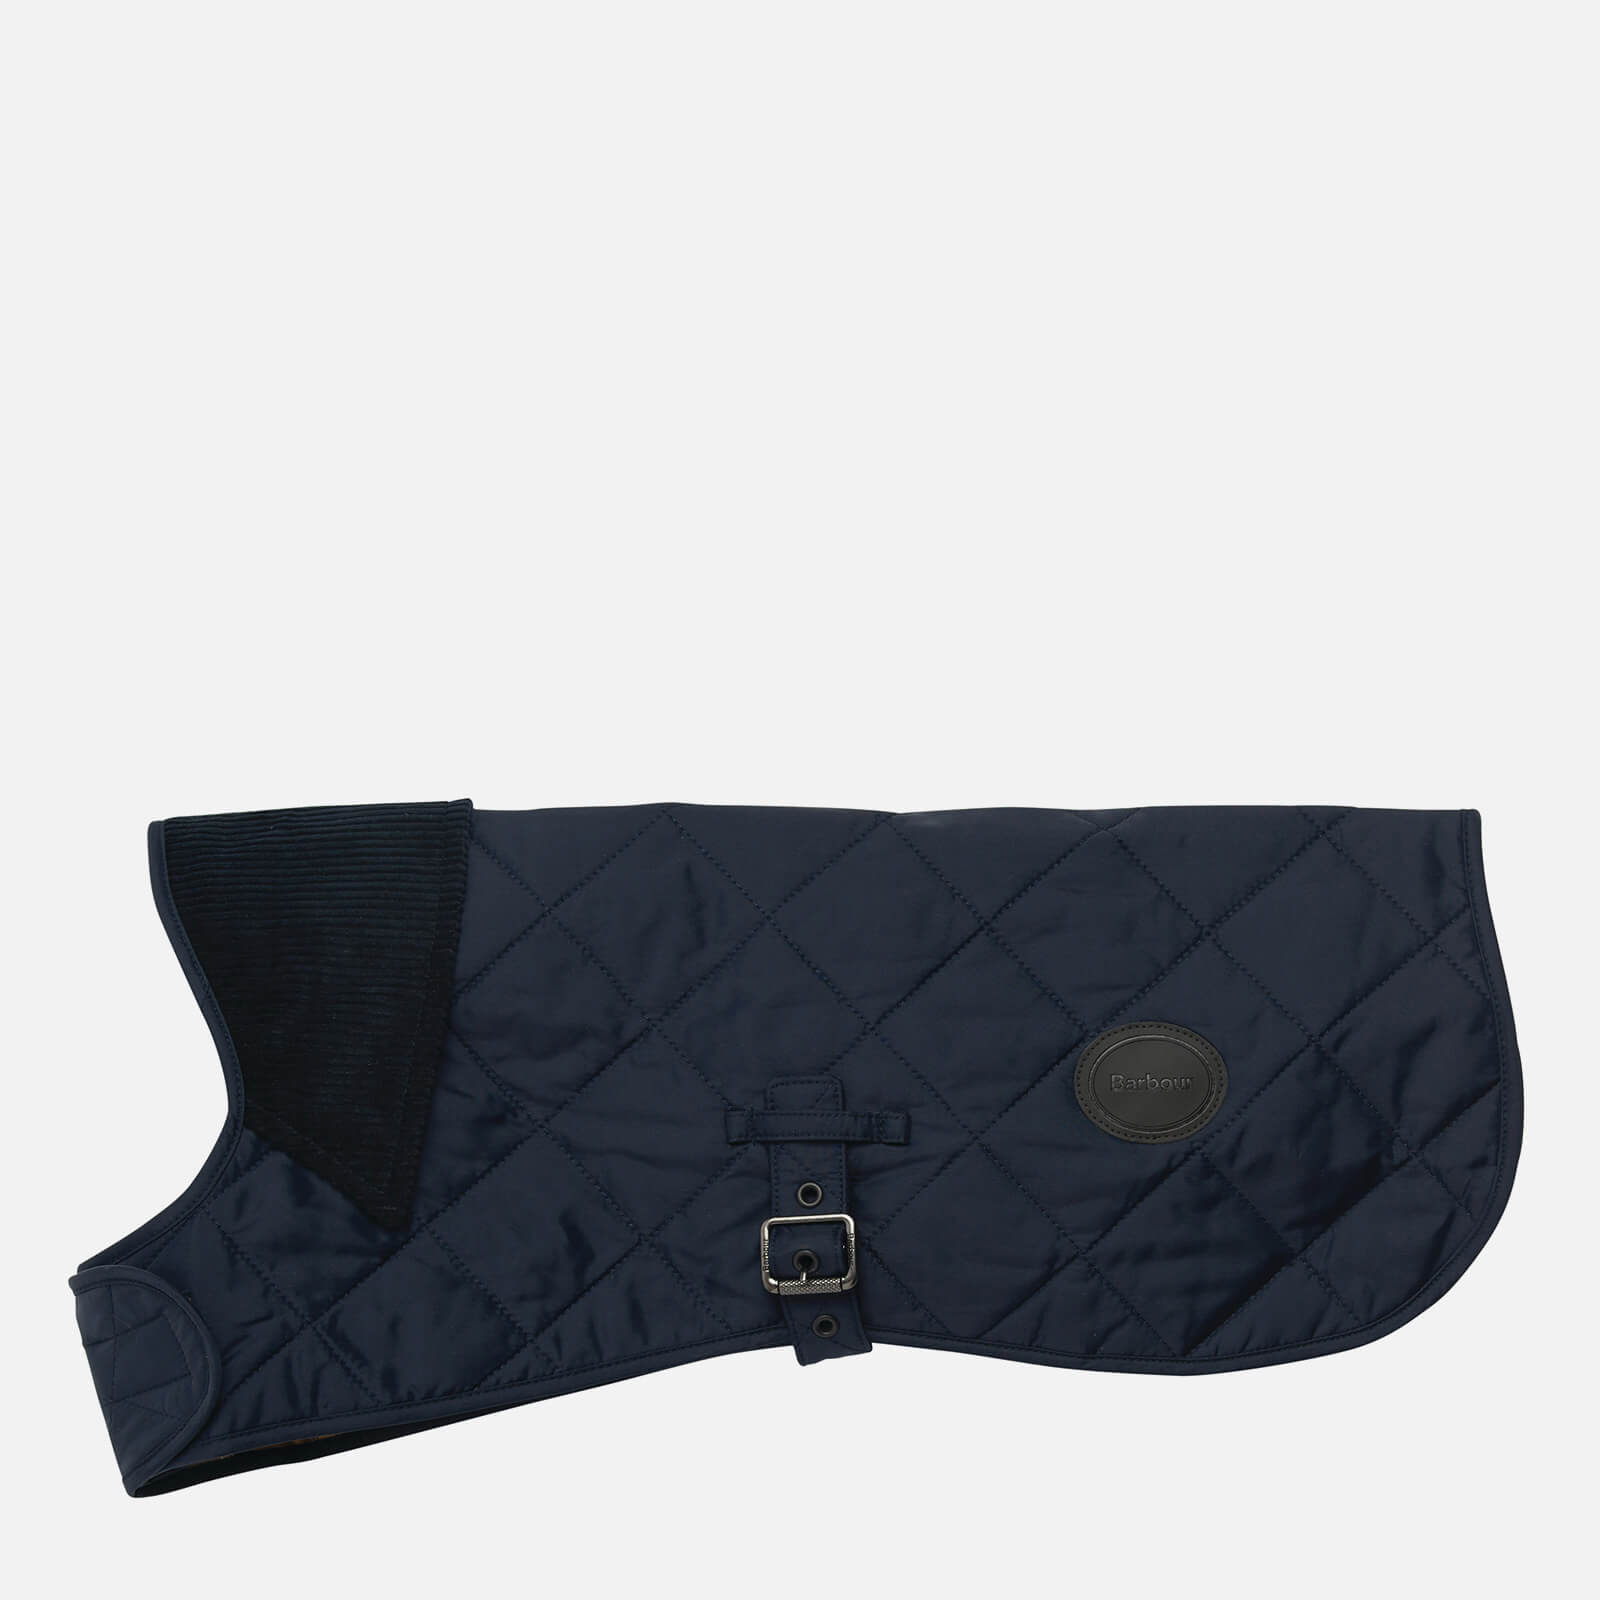 Barbour Causal Quilted Dog Coat - Navy - XS